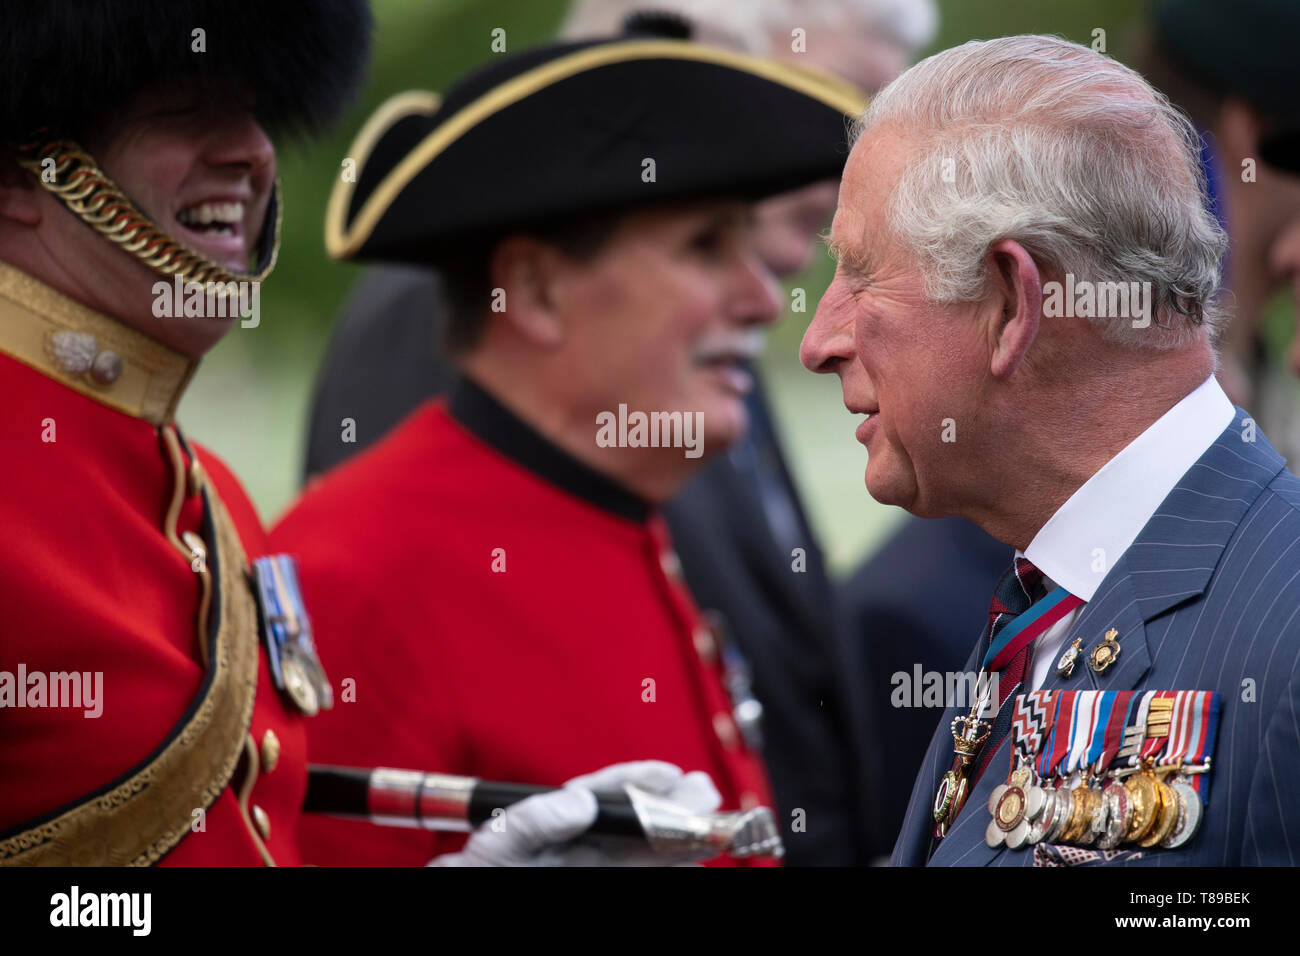 Hyde Park London, UK. 12th May 2019. HRH The Prince of Wales, Field Marshal, Colonel in Chief 1st The Queen’s Dragoon Guards, chats with members of the services and their families after The Combined Cavalry Old Comrades Association 95th annual parade and service. Credit: Malcolm Park/Alamy Live News. Stock Photo